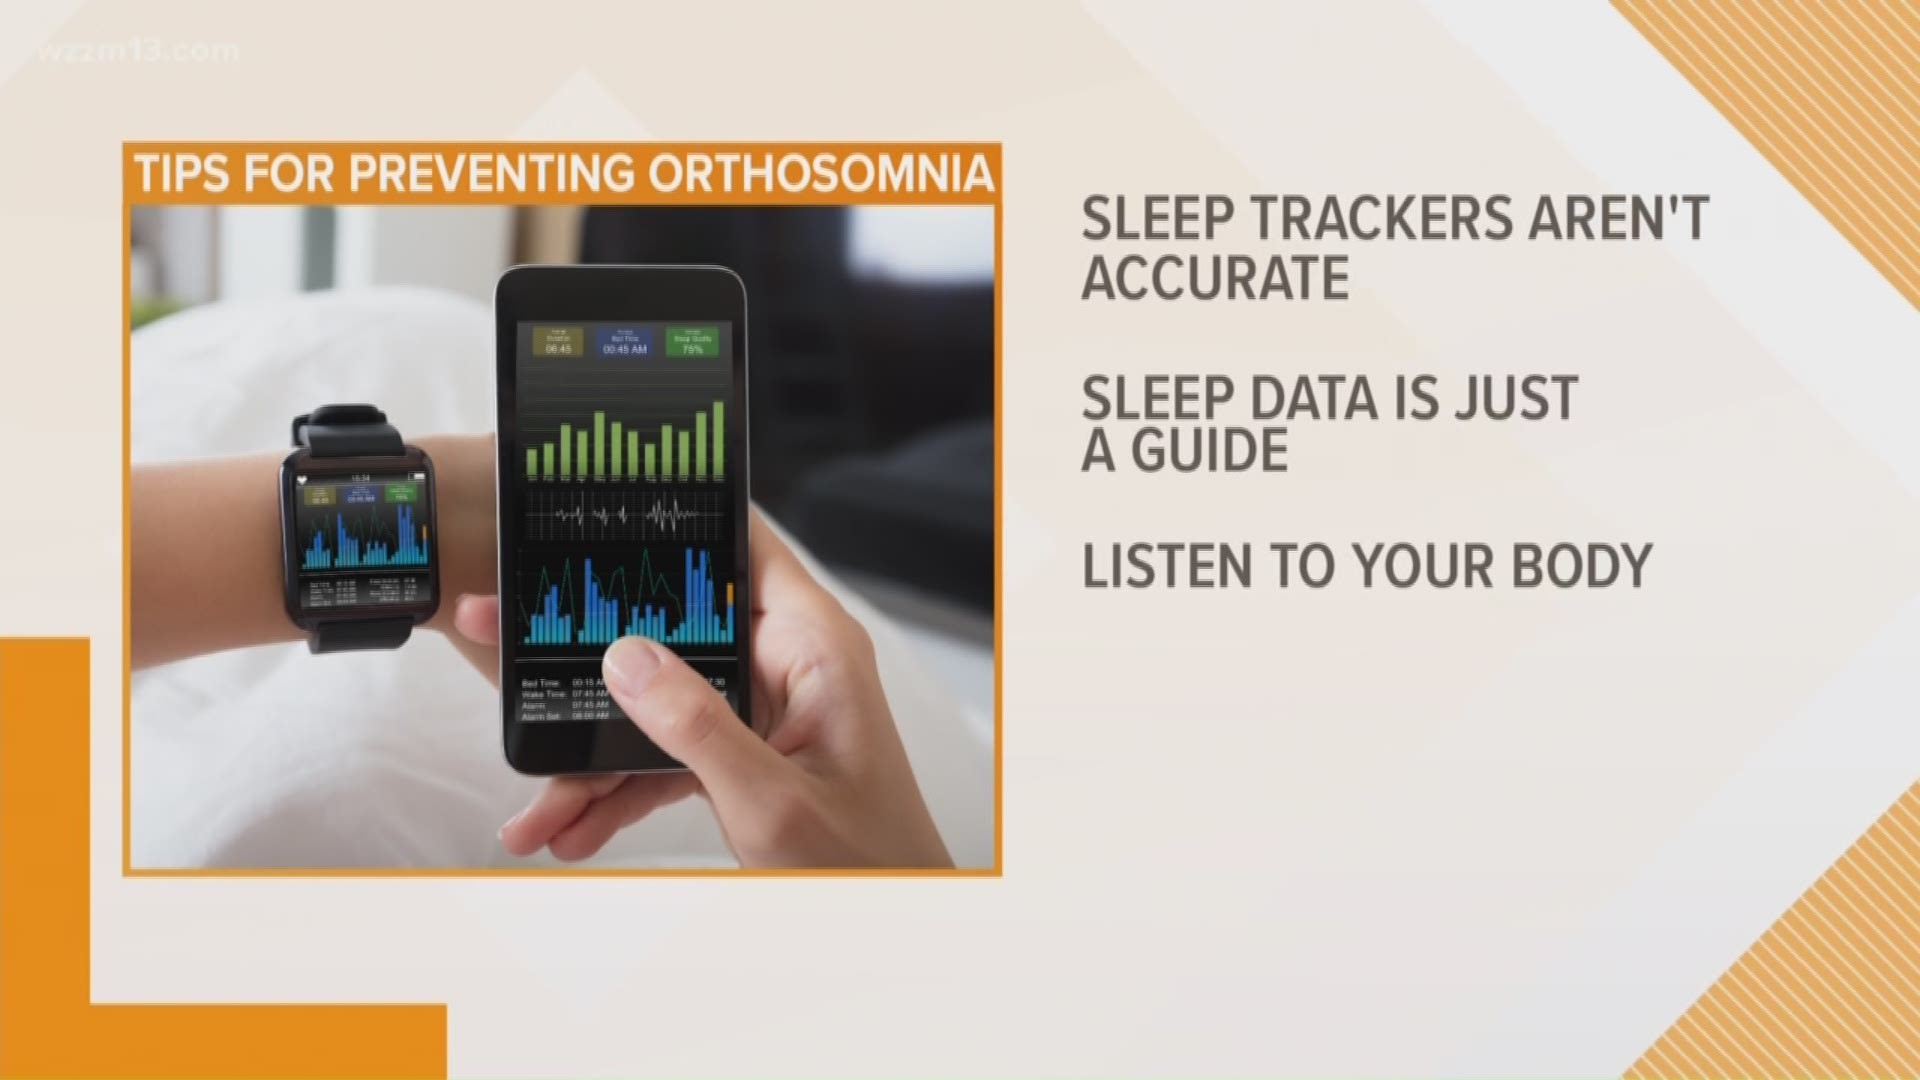 Fitness trackers can keep you up at night